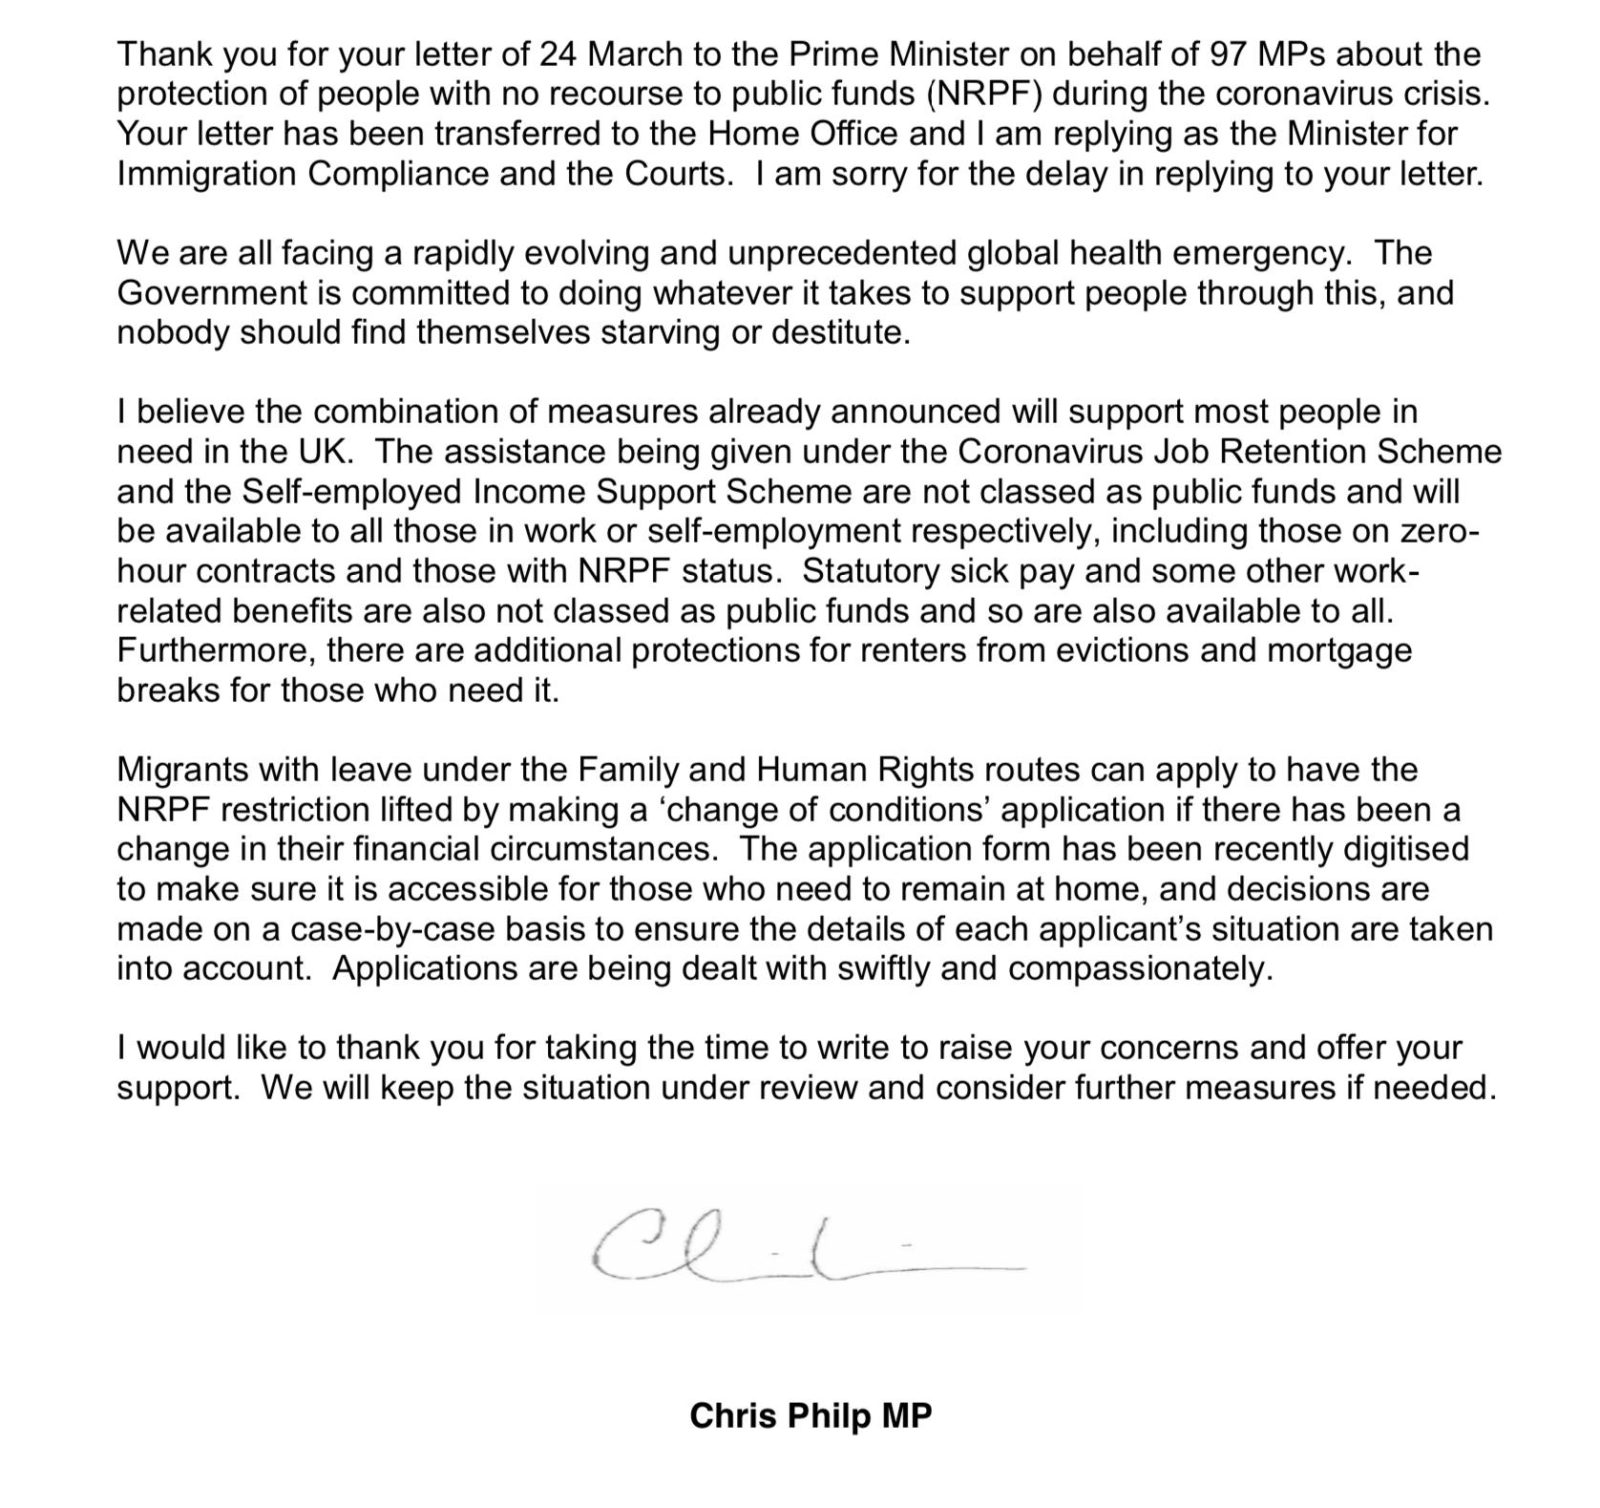 Reply letter from Chris Philip, Home Office and Justice Minister